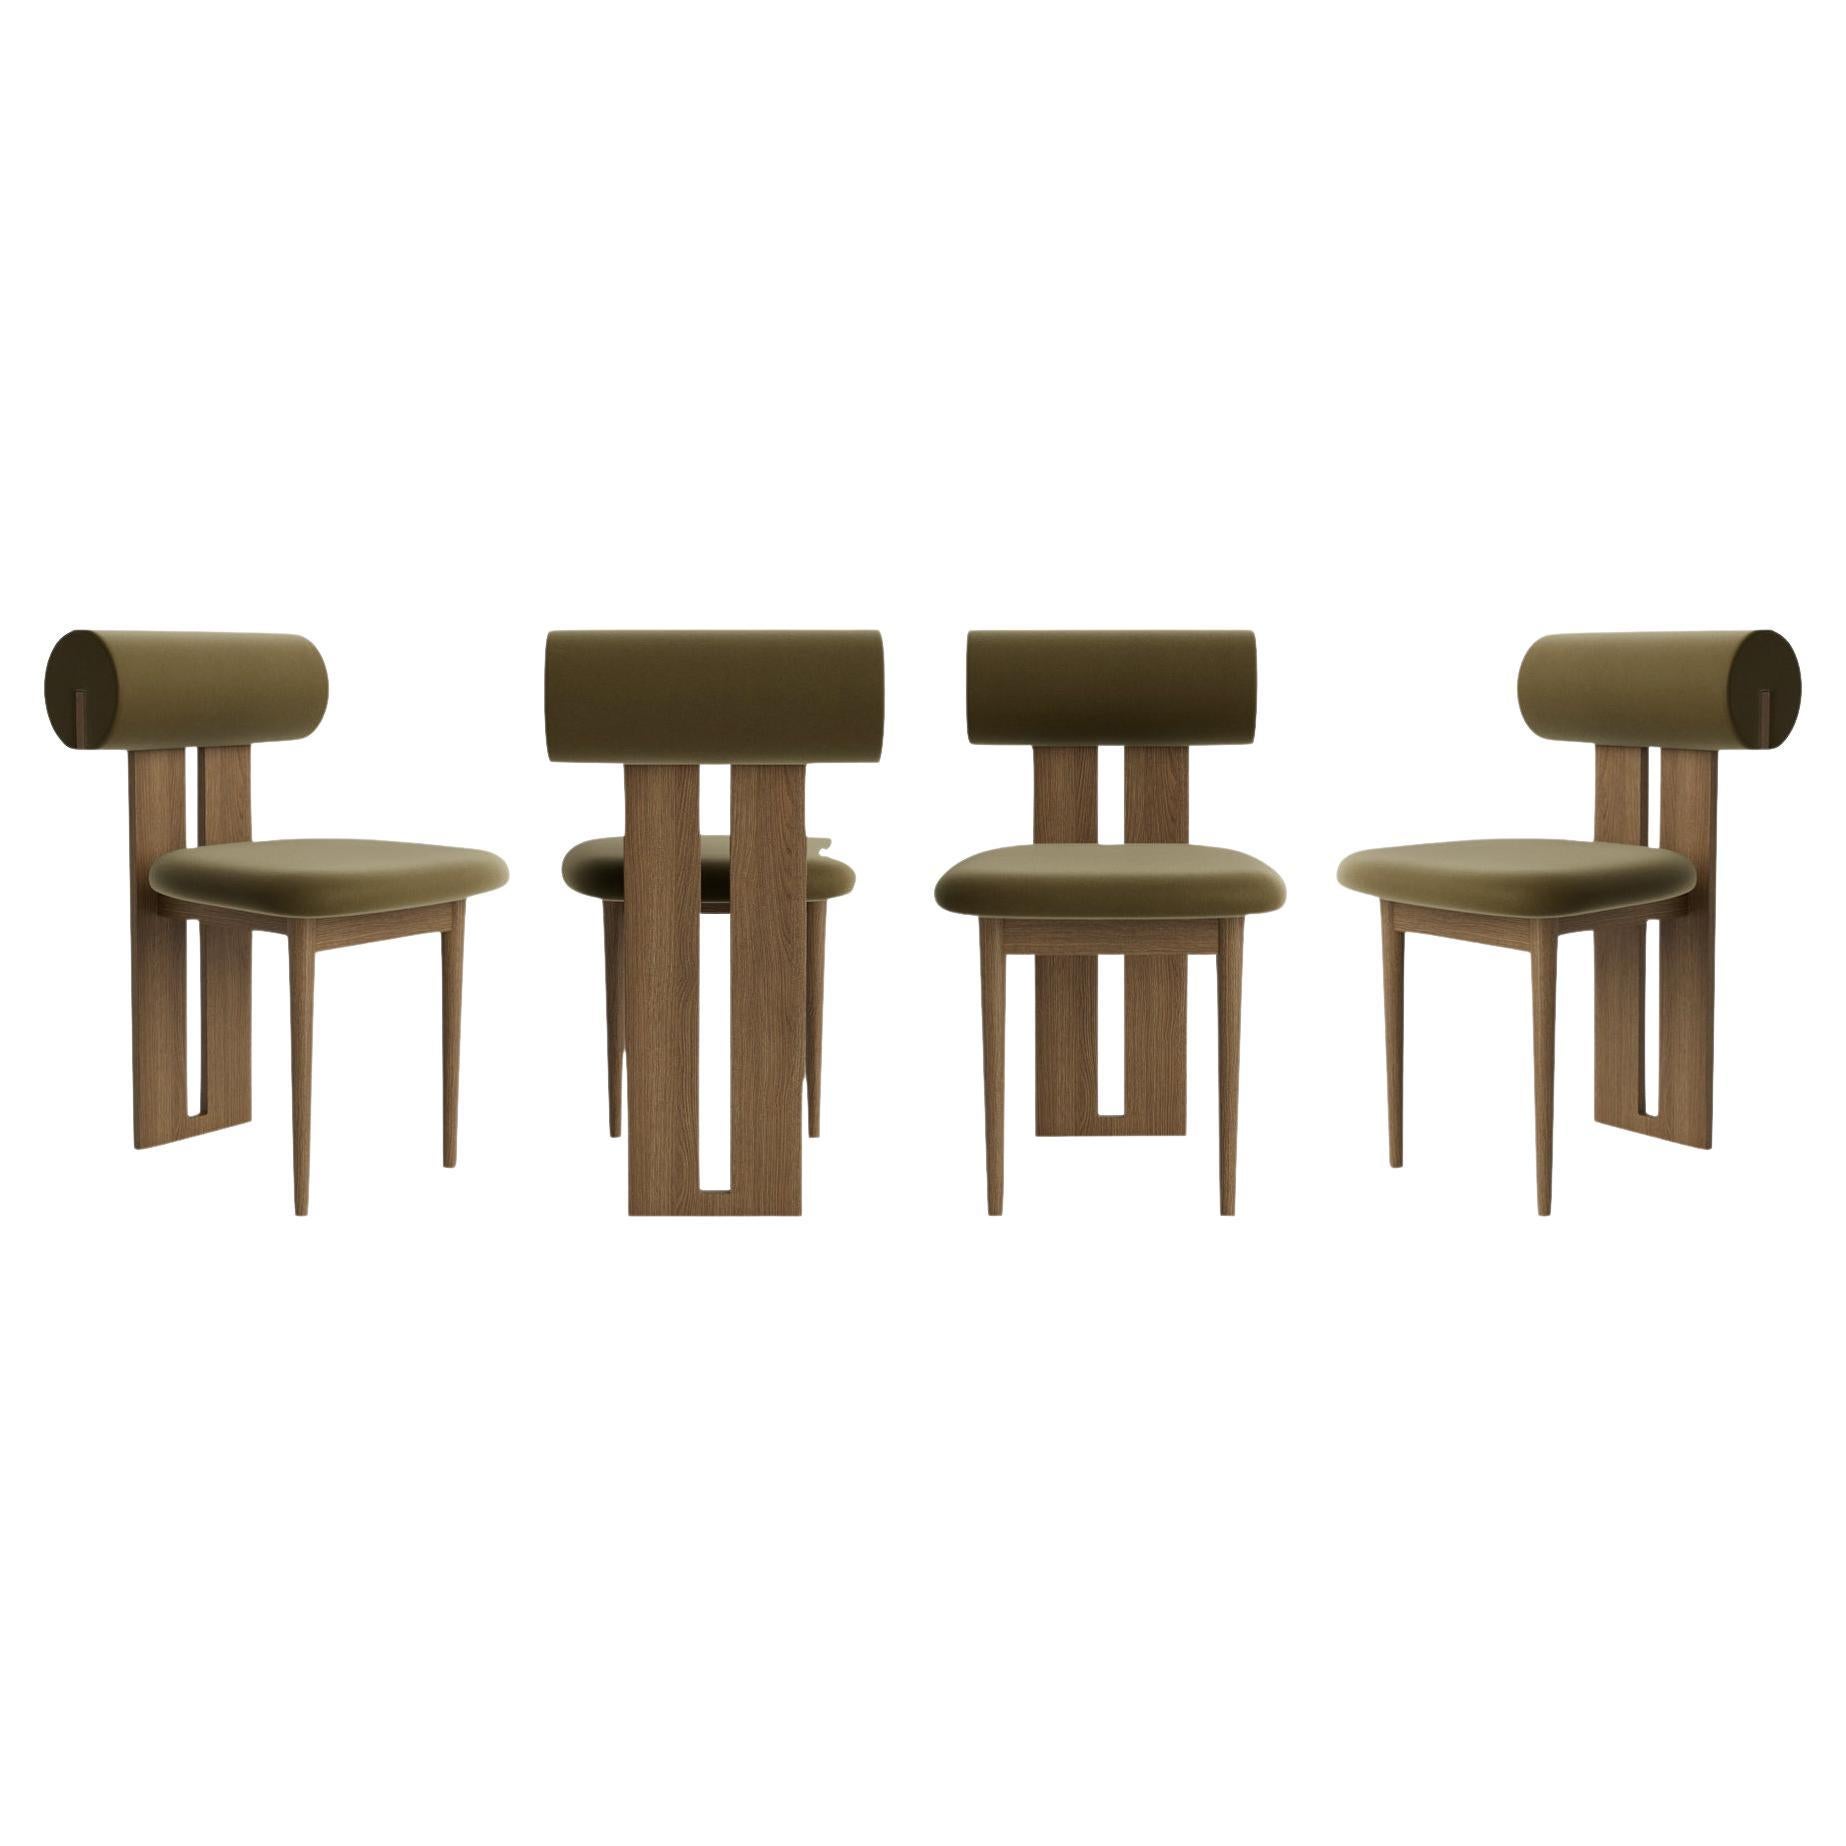 Contemporary Set of 4 Chairs 'Hippo' by Norr11, Light Smoked Oak, Velvet, Olive For Sale